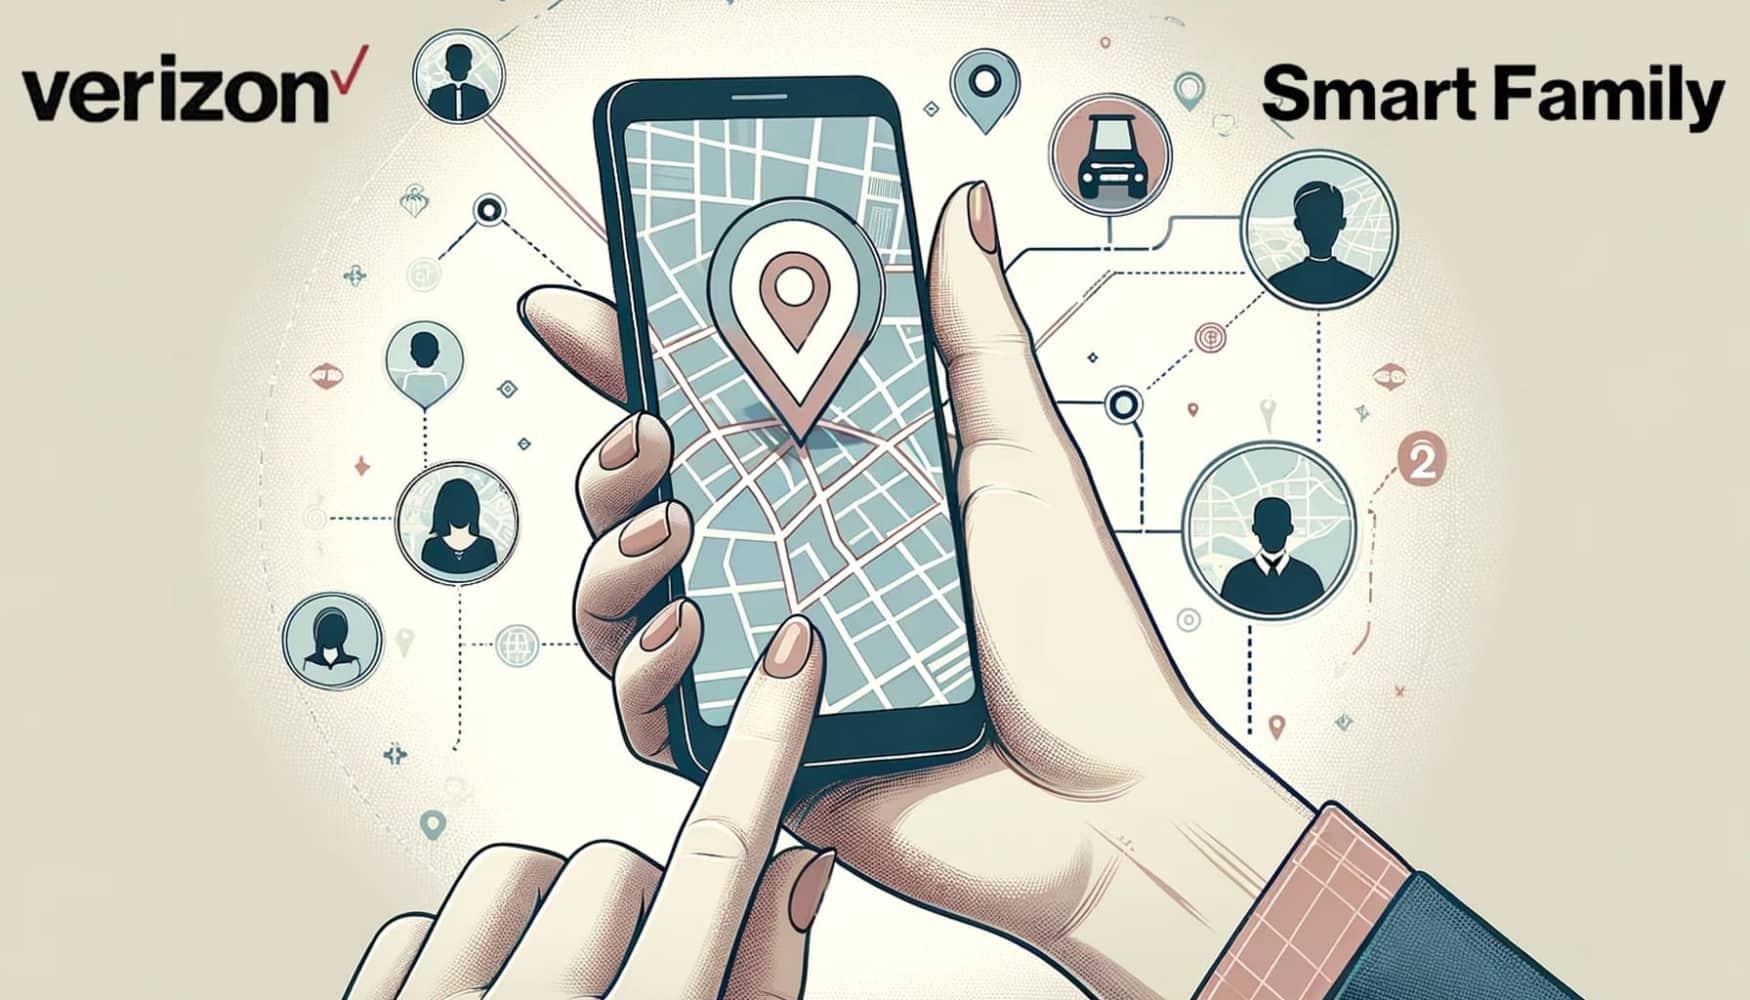 Picture for Verizon Smart Family service of a woman's hands holding a phone with a location on a map on it